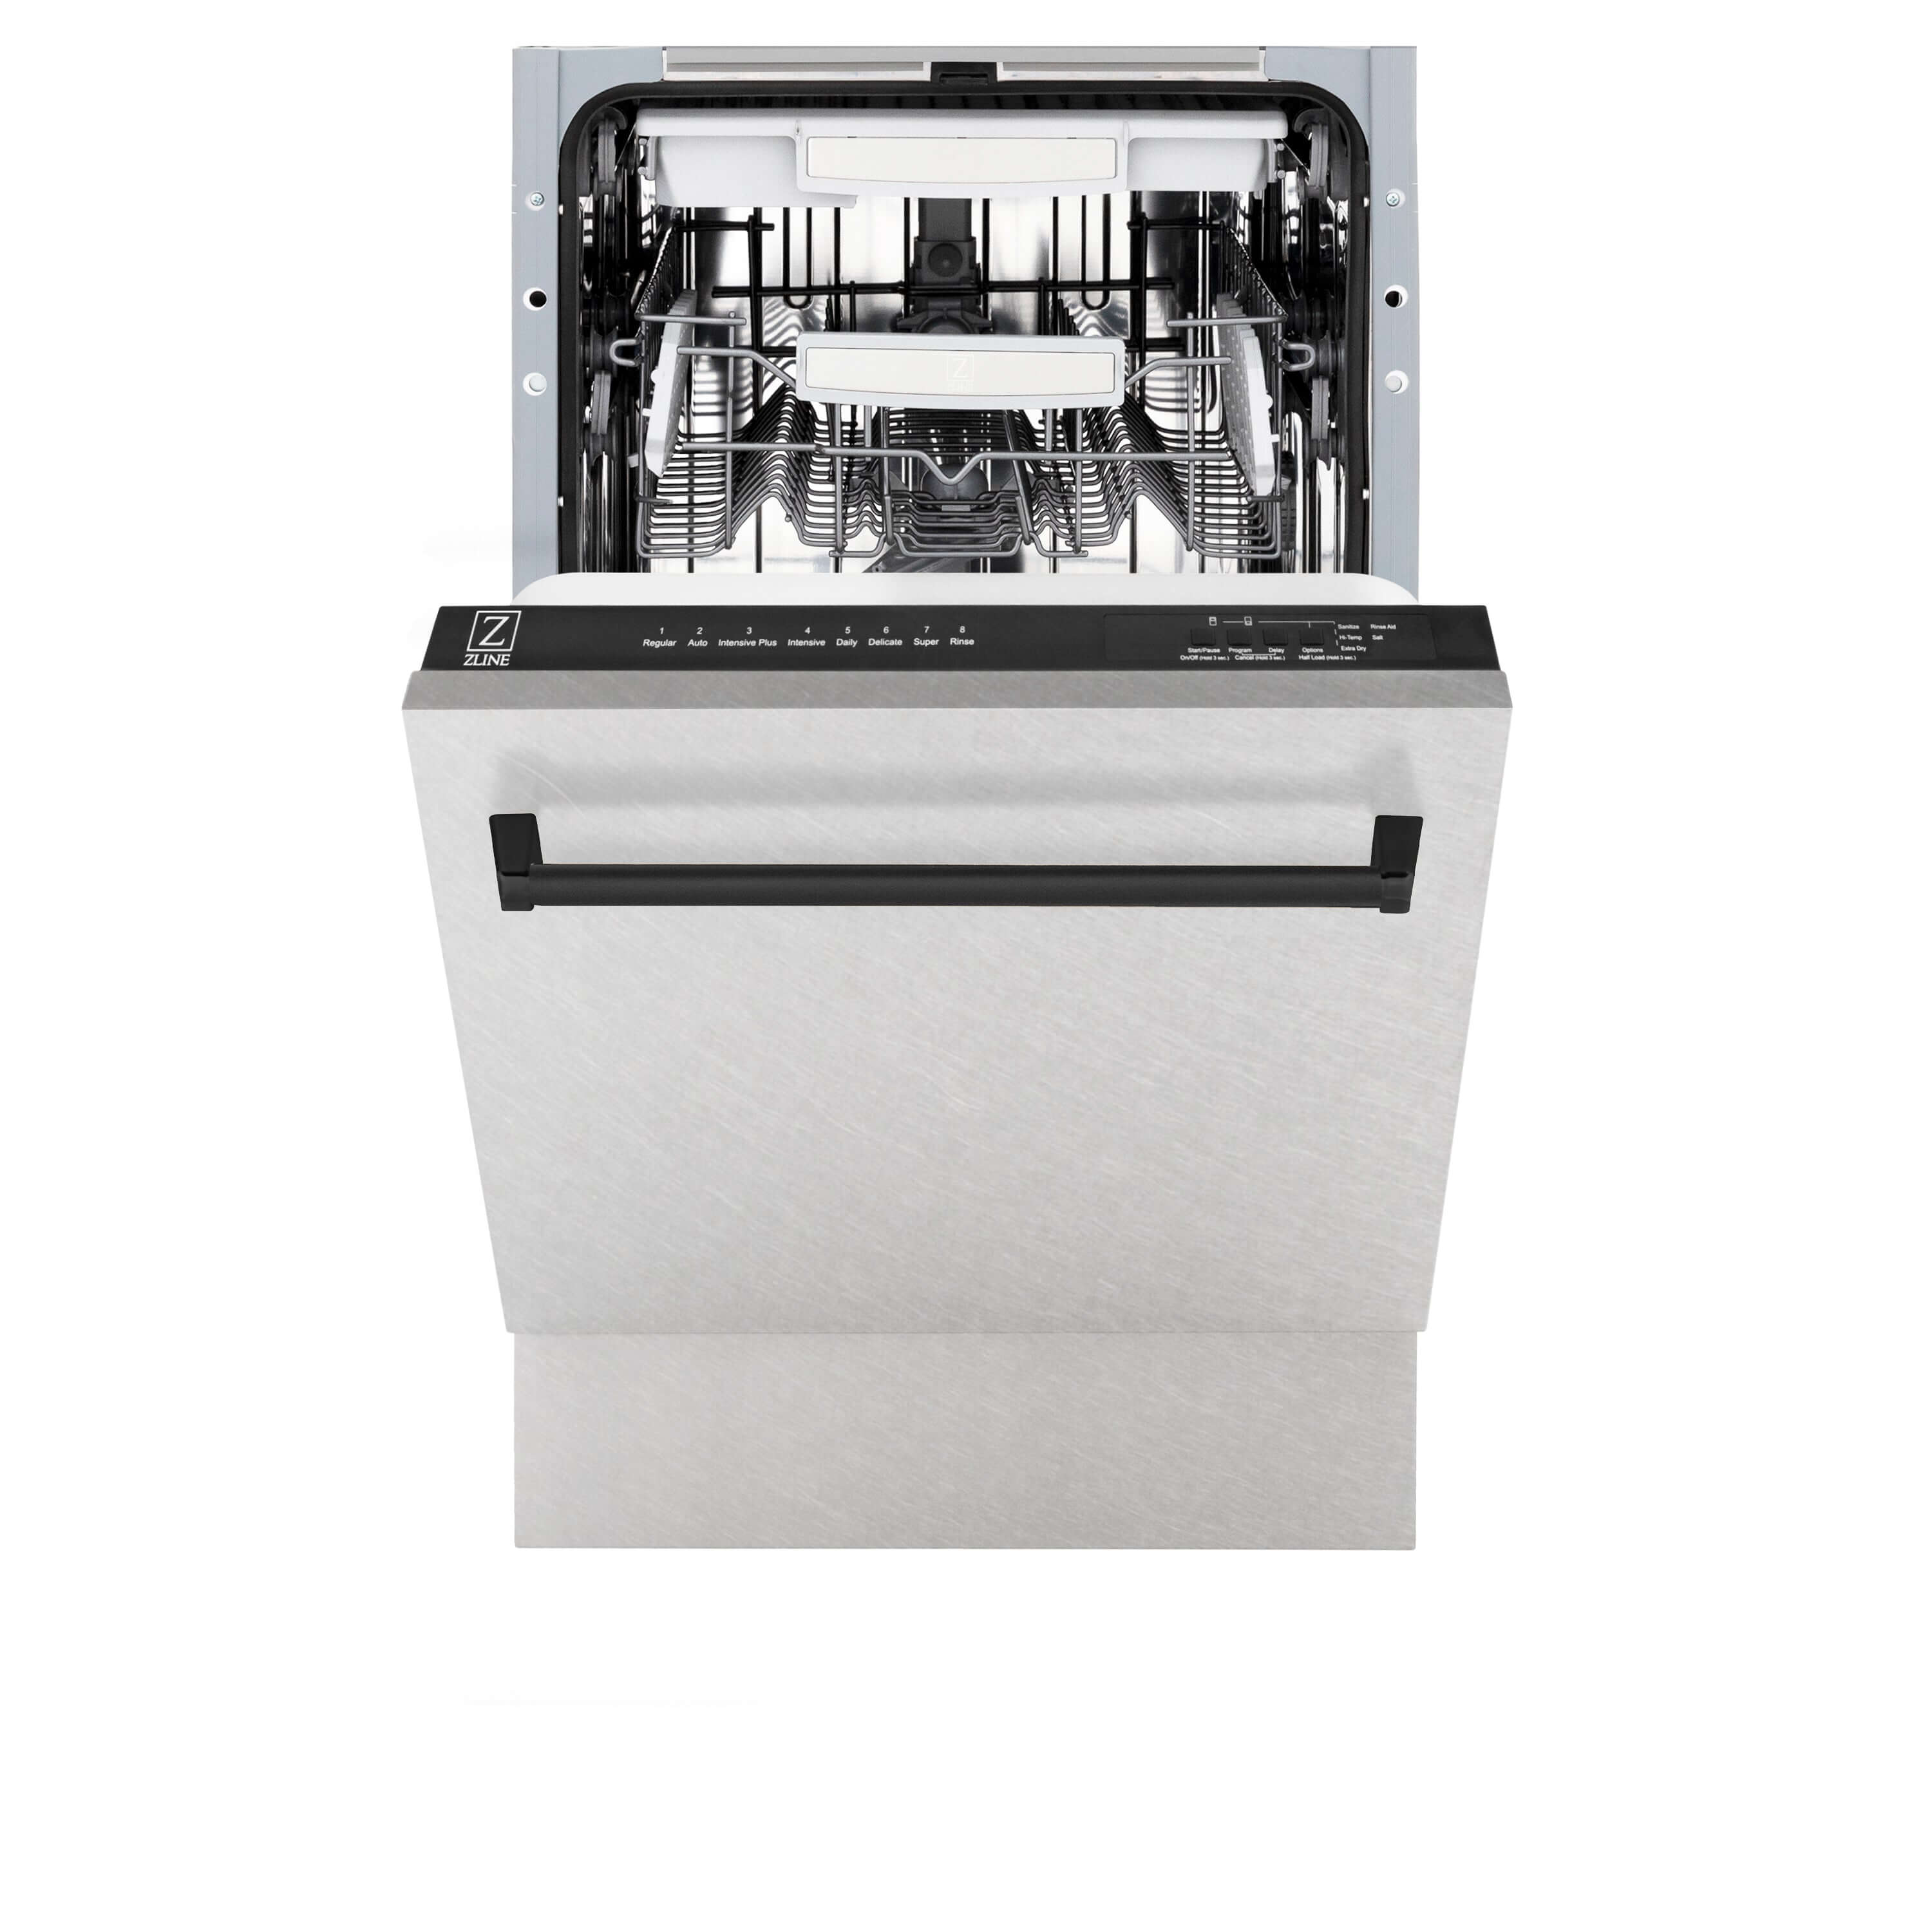 ZLINE Autograph Edition 18 in. Tallac Series 3rd Rack Top Control Built-In Dishwasher in Fingerprint Resistant Stainless Steel with Matte Black Handle, 51dBa (DWVZ-SN-18-MB) front, half open.